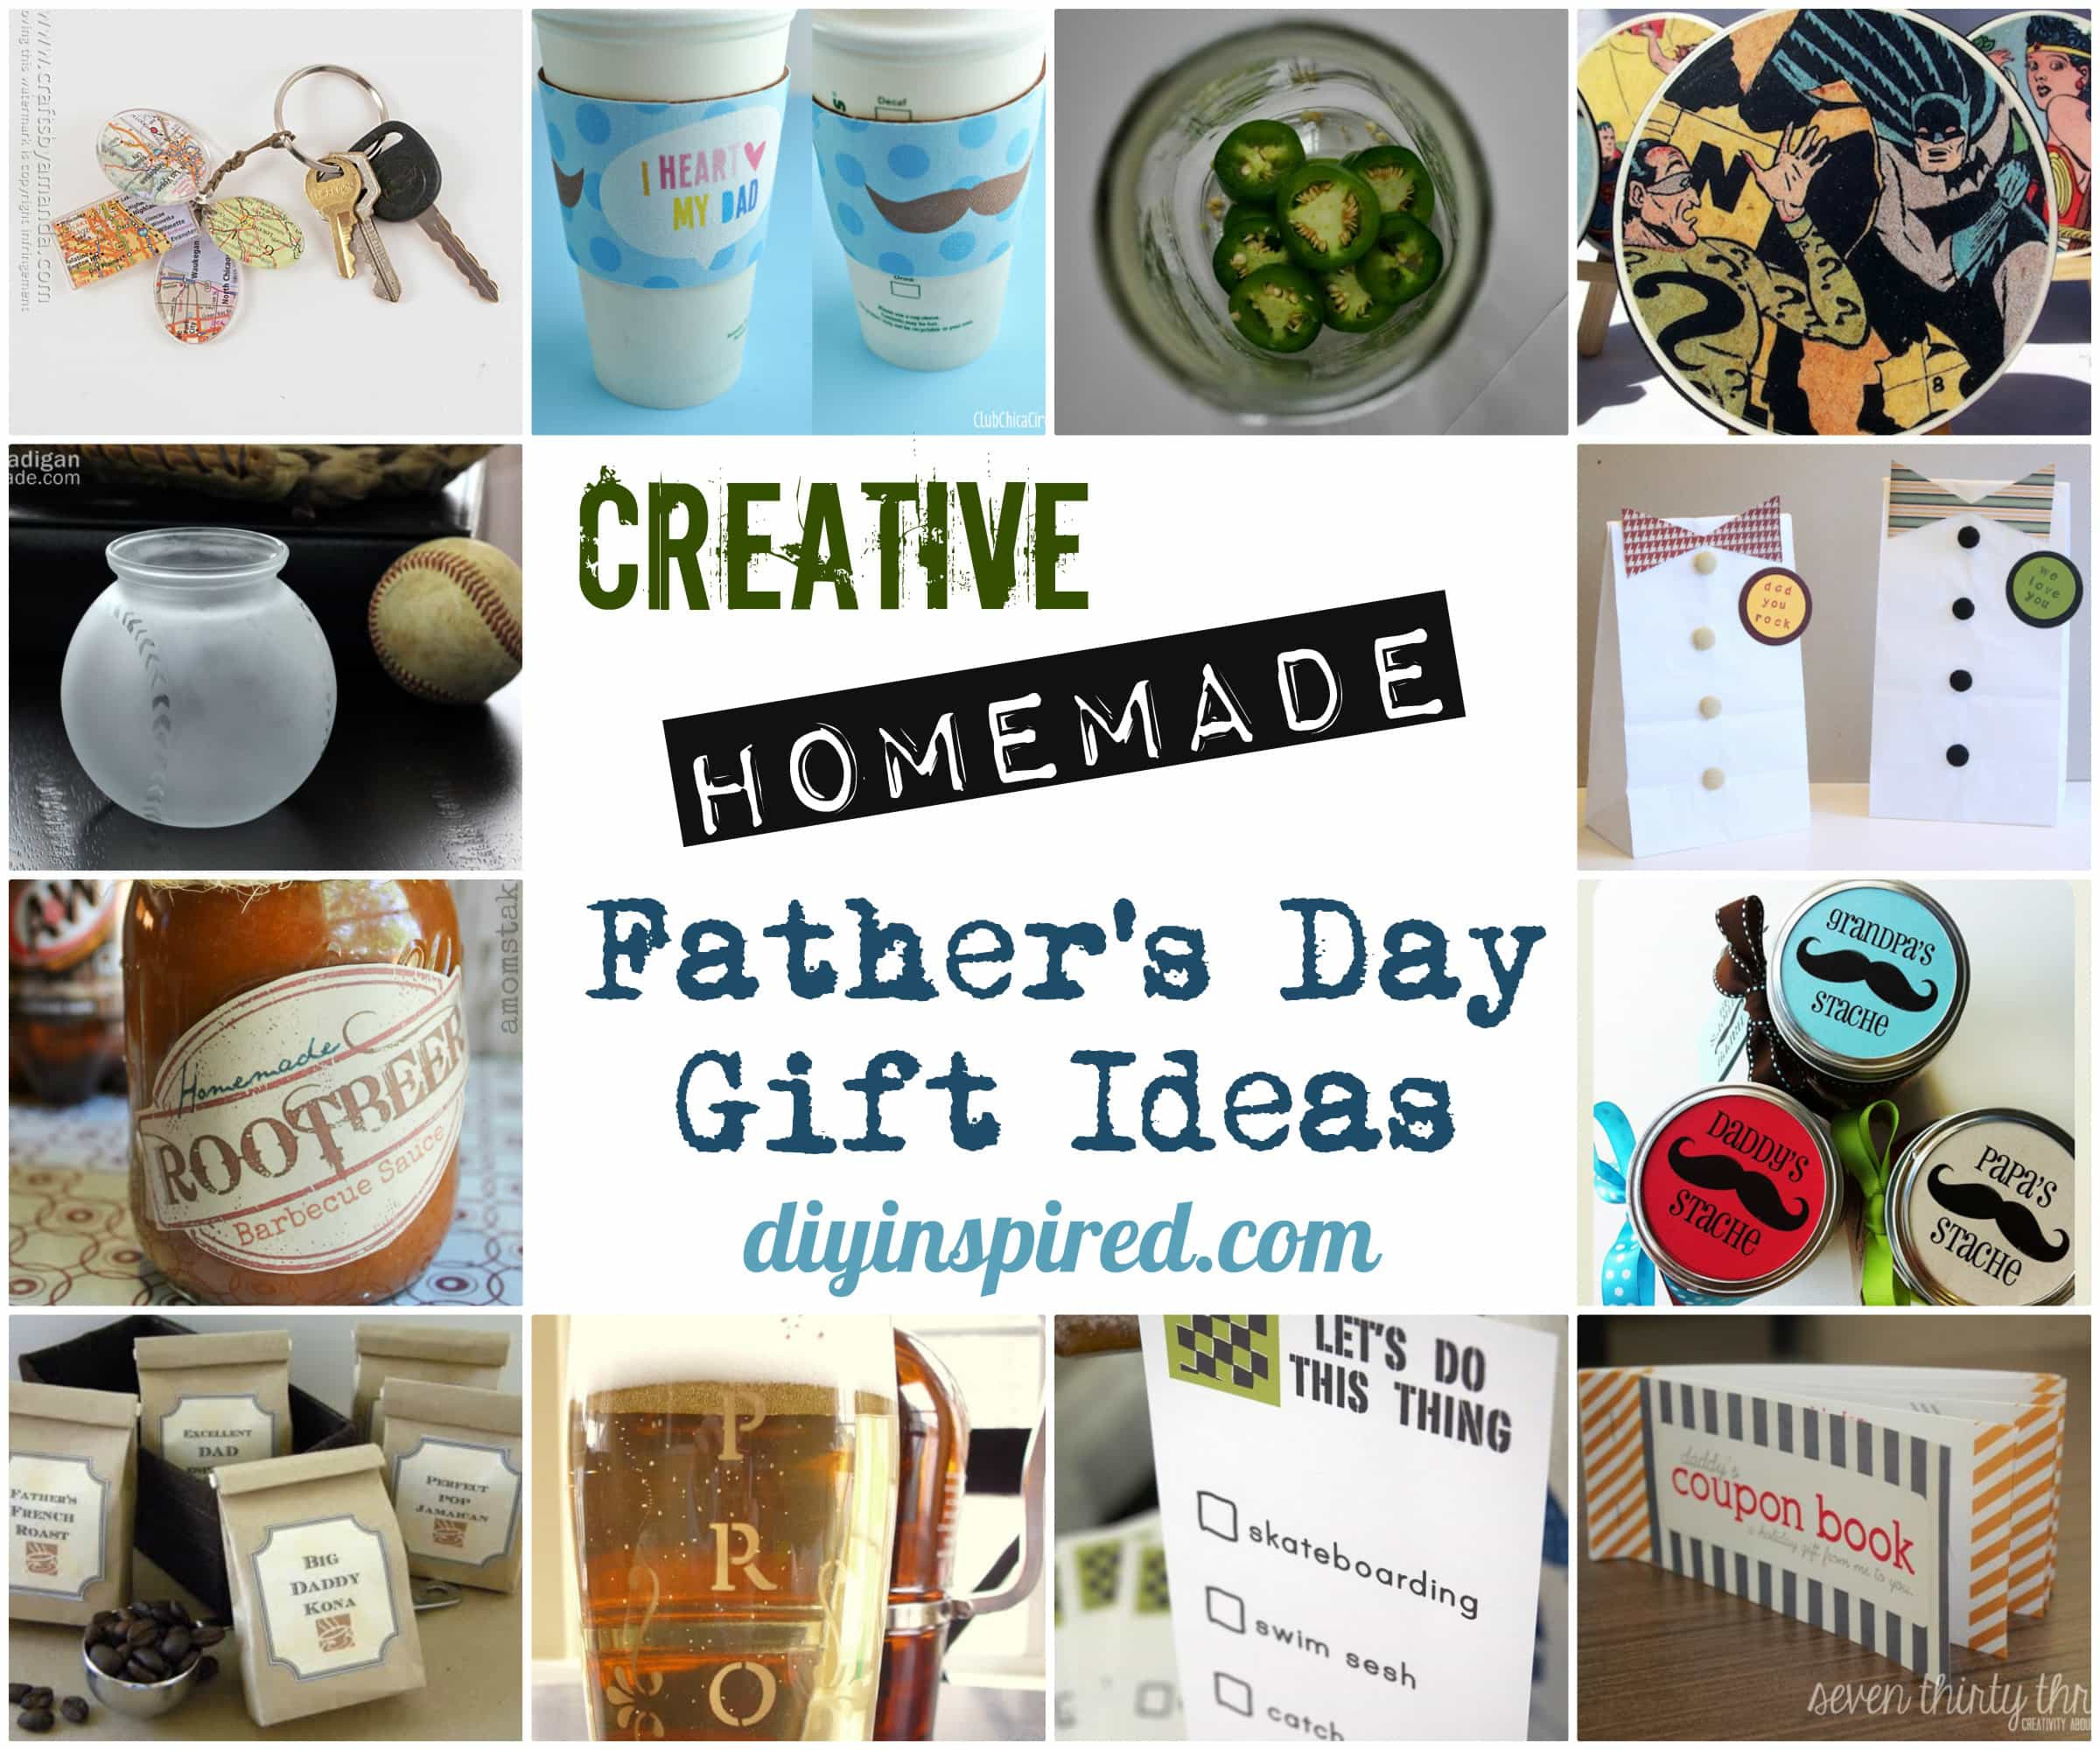 DIY Fathers Day Gift Ideas
 Creative Homemade Father’s Day Gift Ideas DIY Inspired